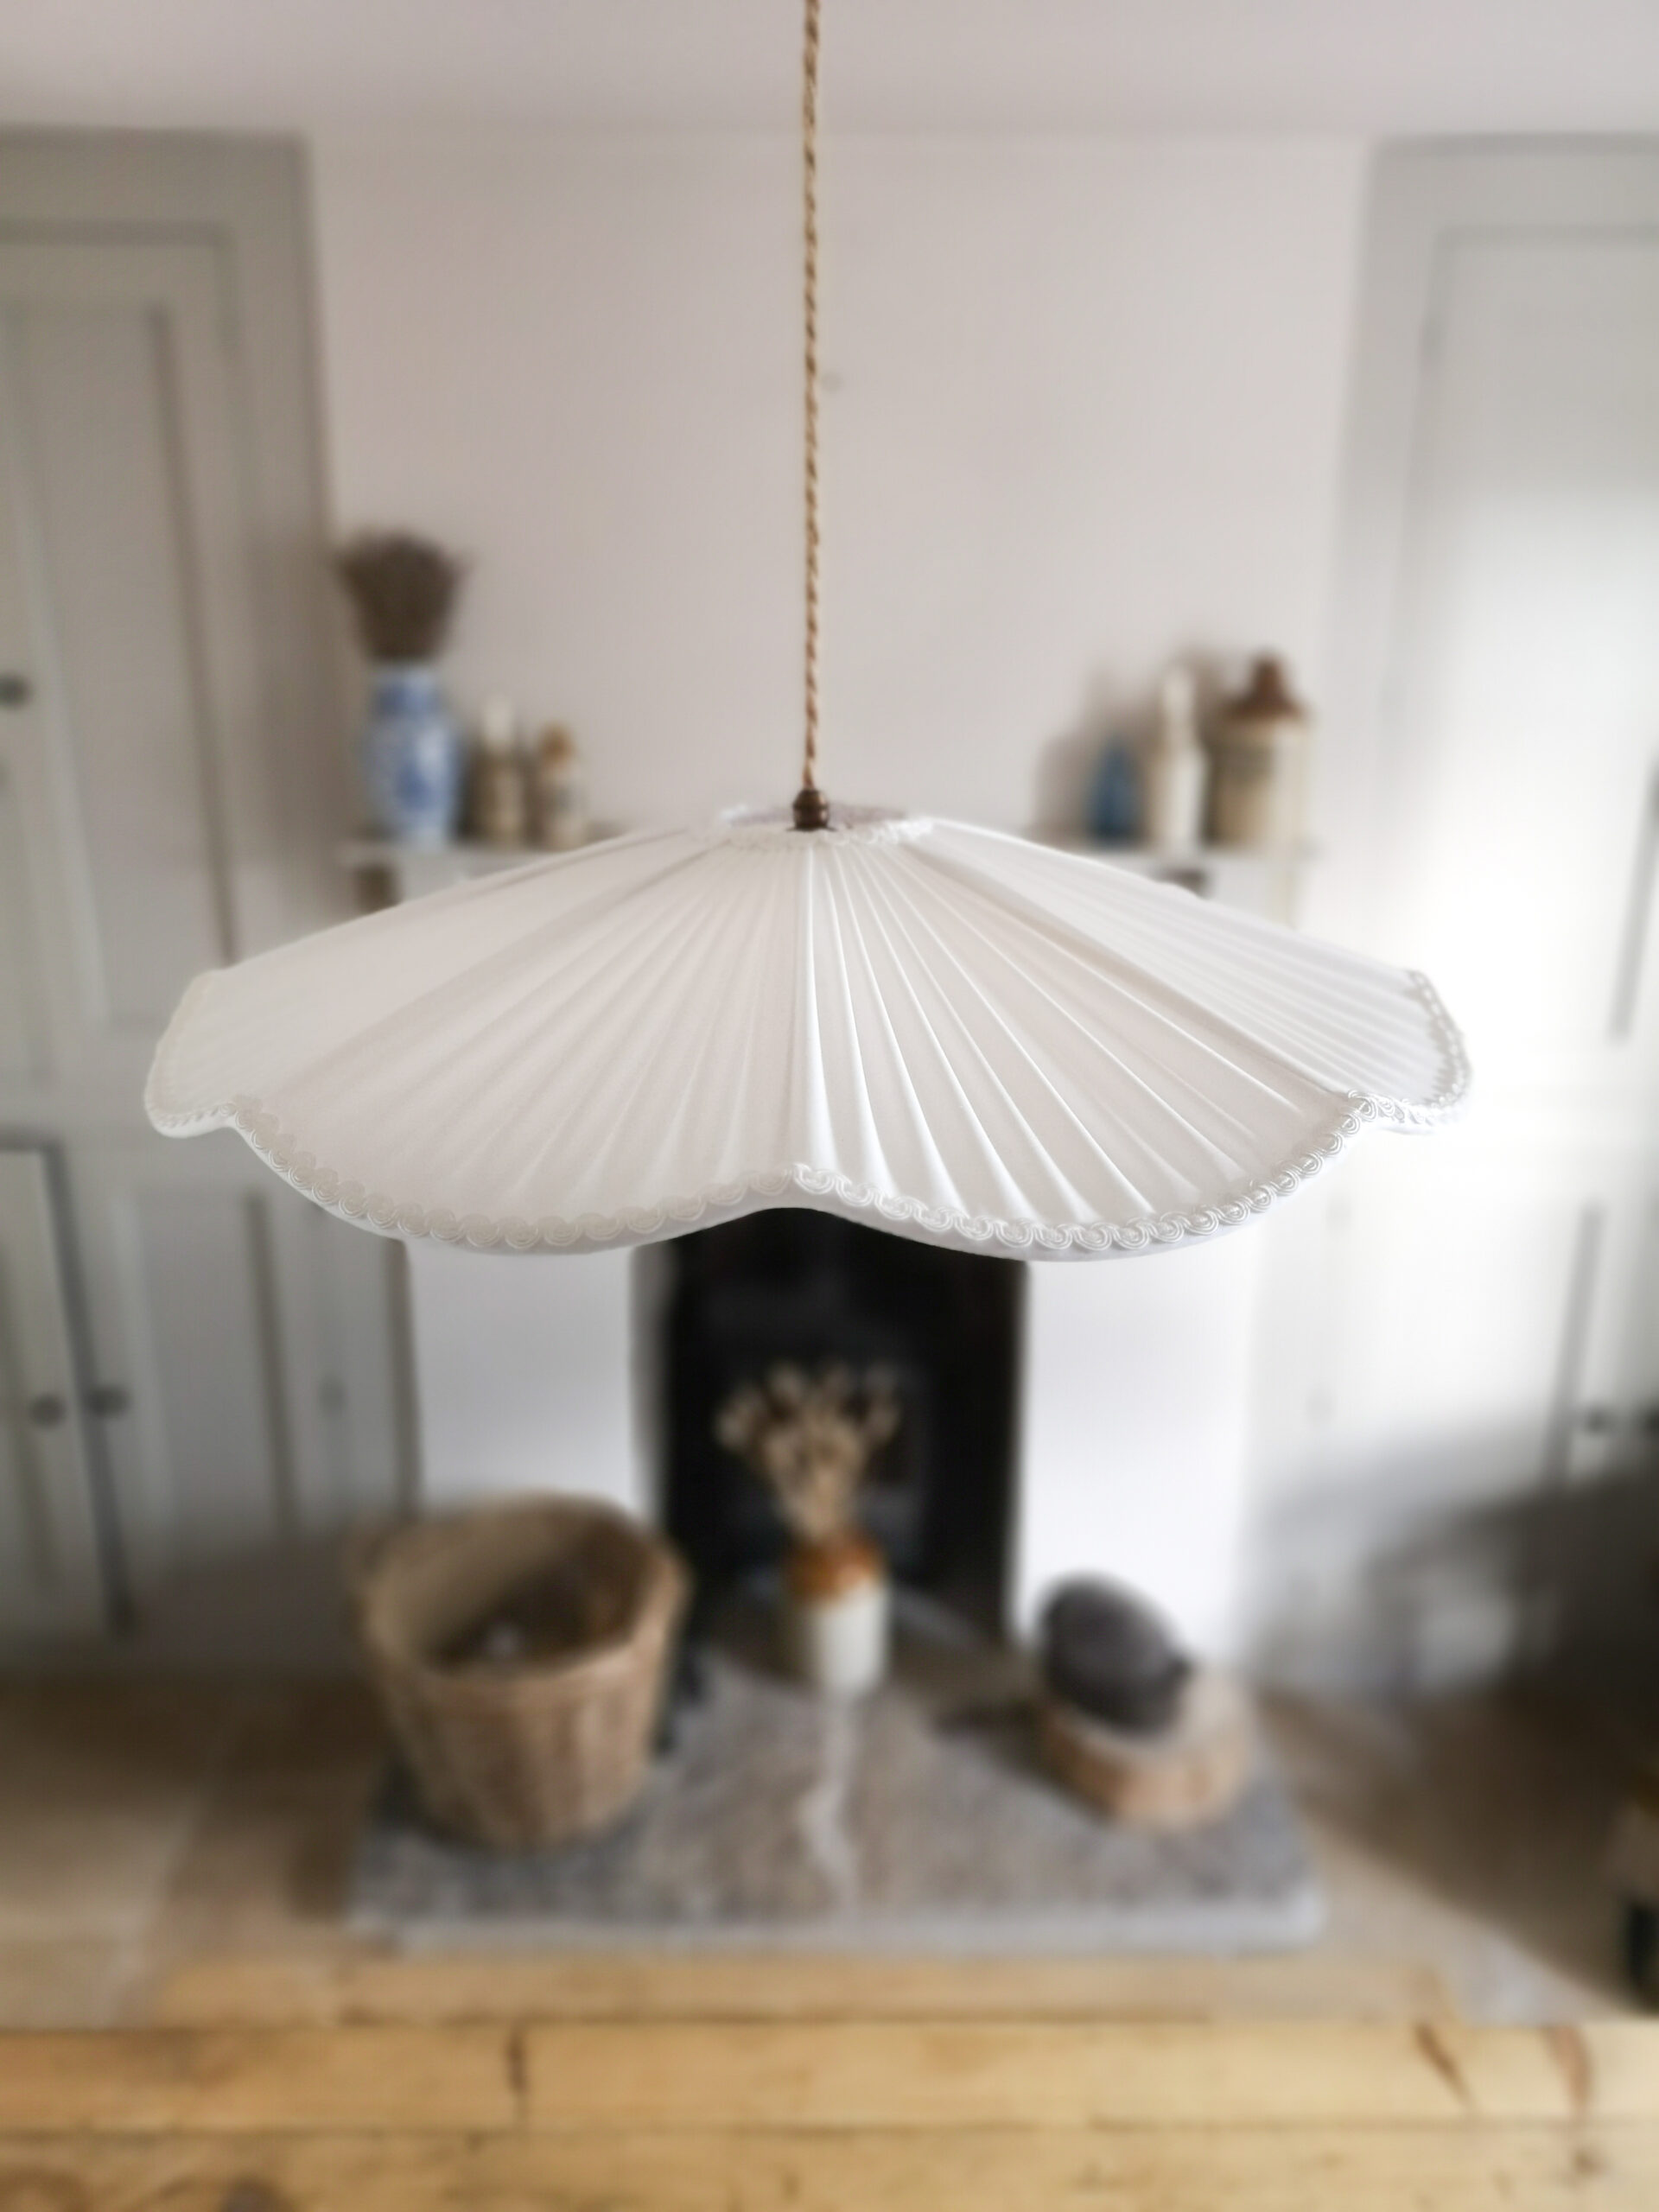 Featured image for “Ivory Scallop Shell Lampshade”